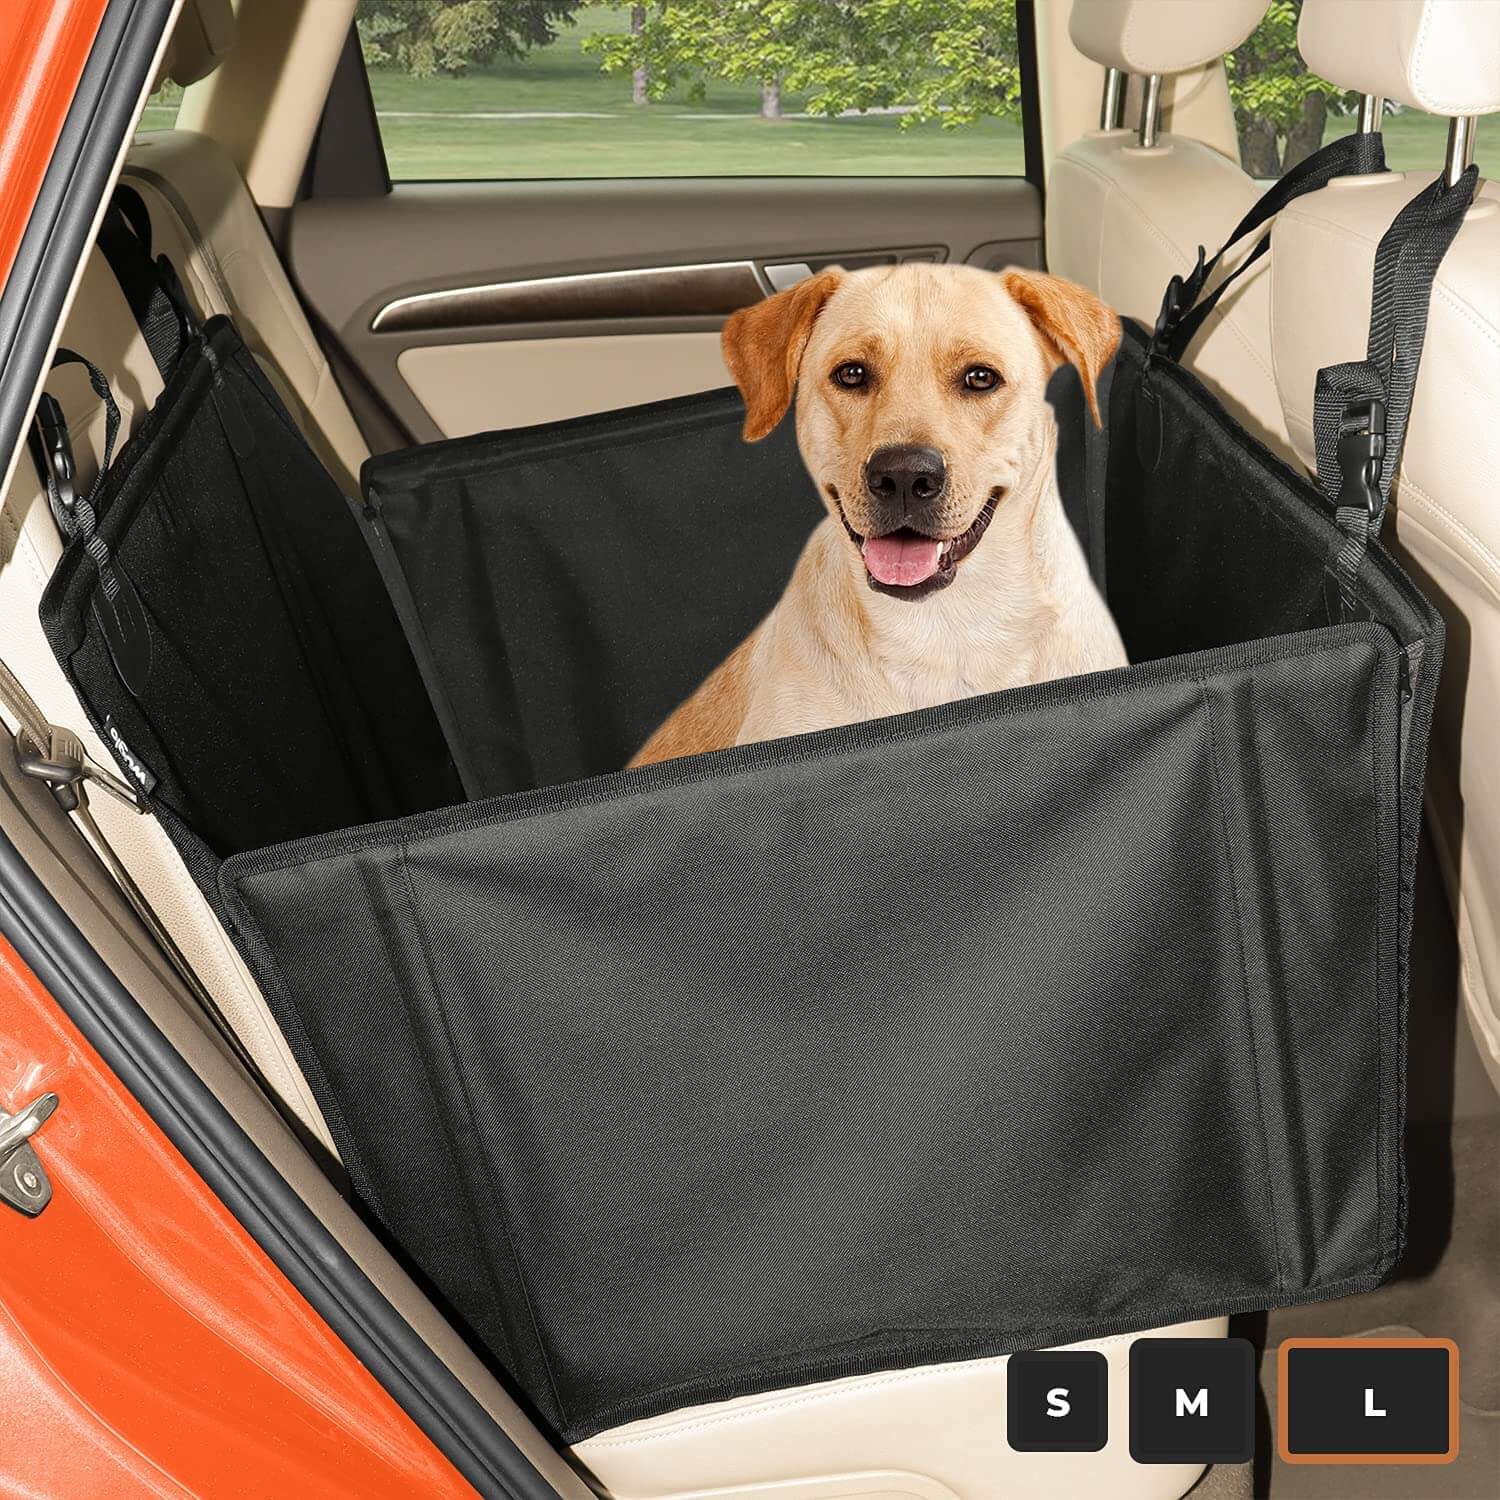 Wuglo Extra Stable Large Dog Car Seat